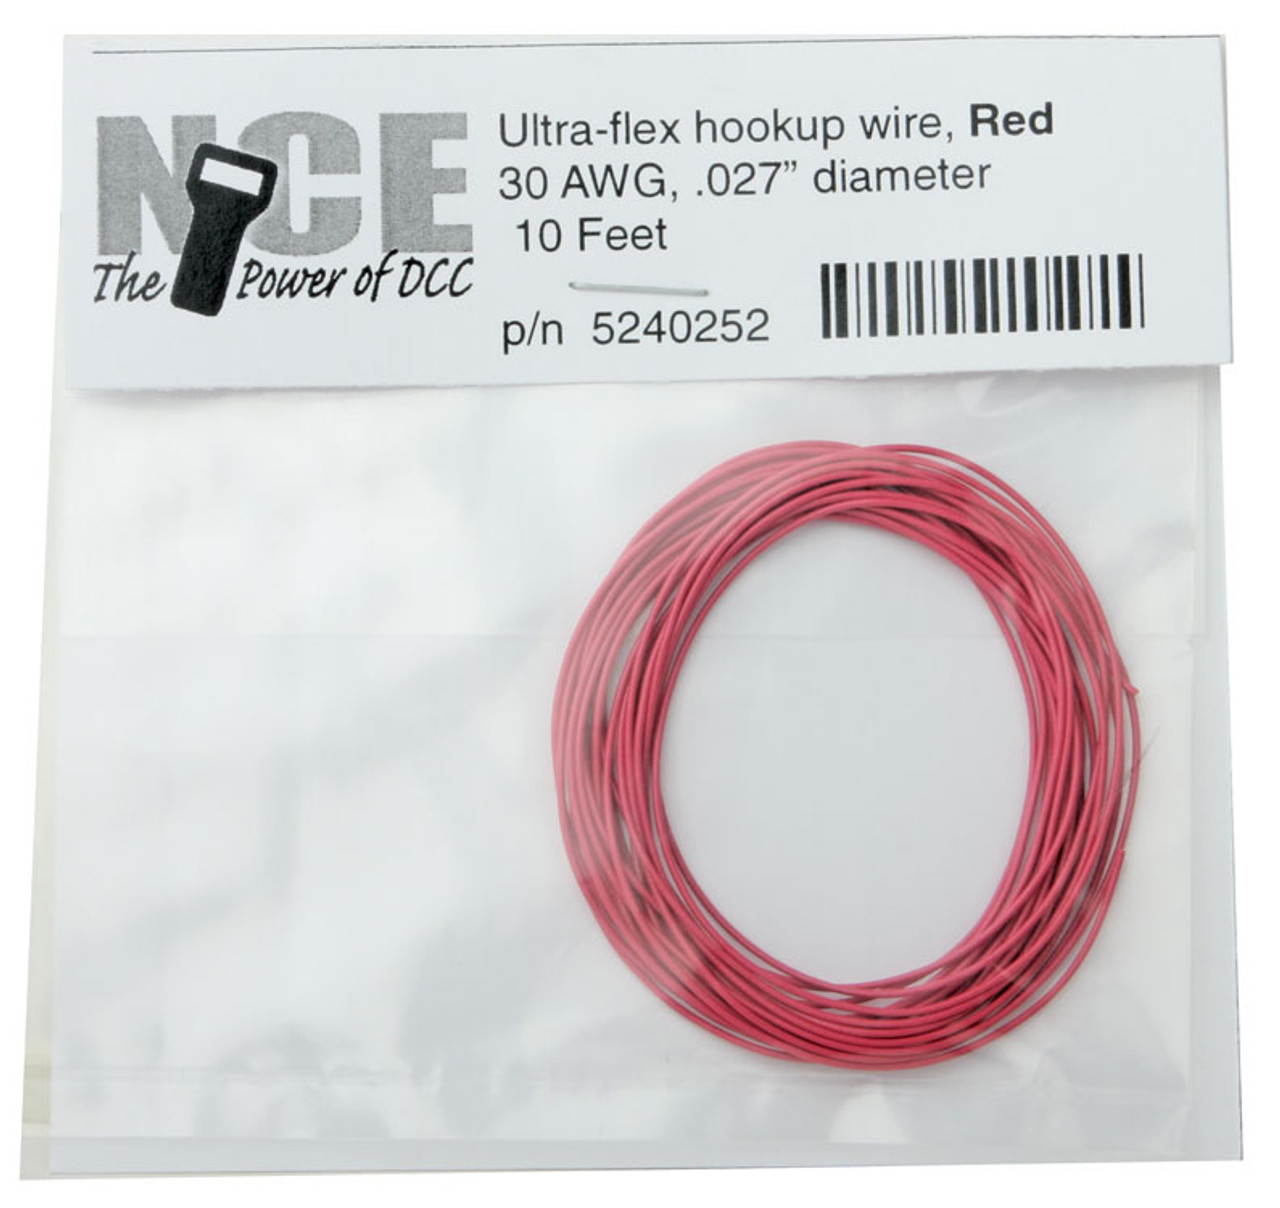 NCE DCC 5240252 10' of 30 Gauge Wire, Red